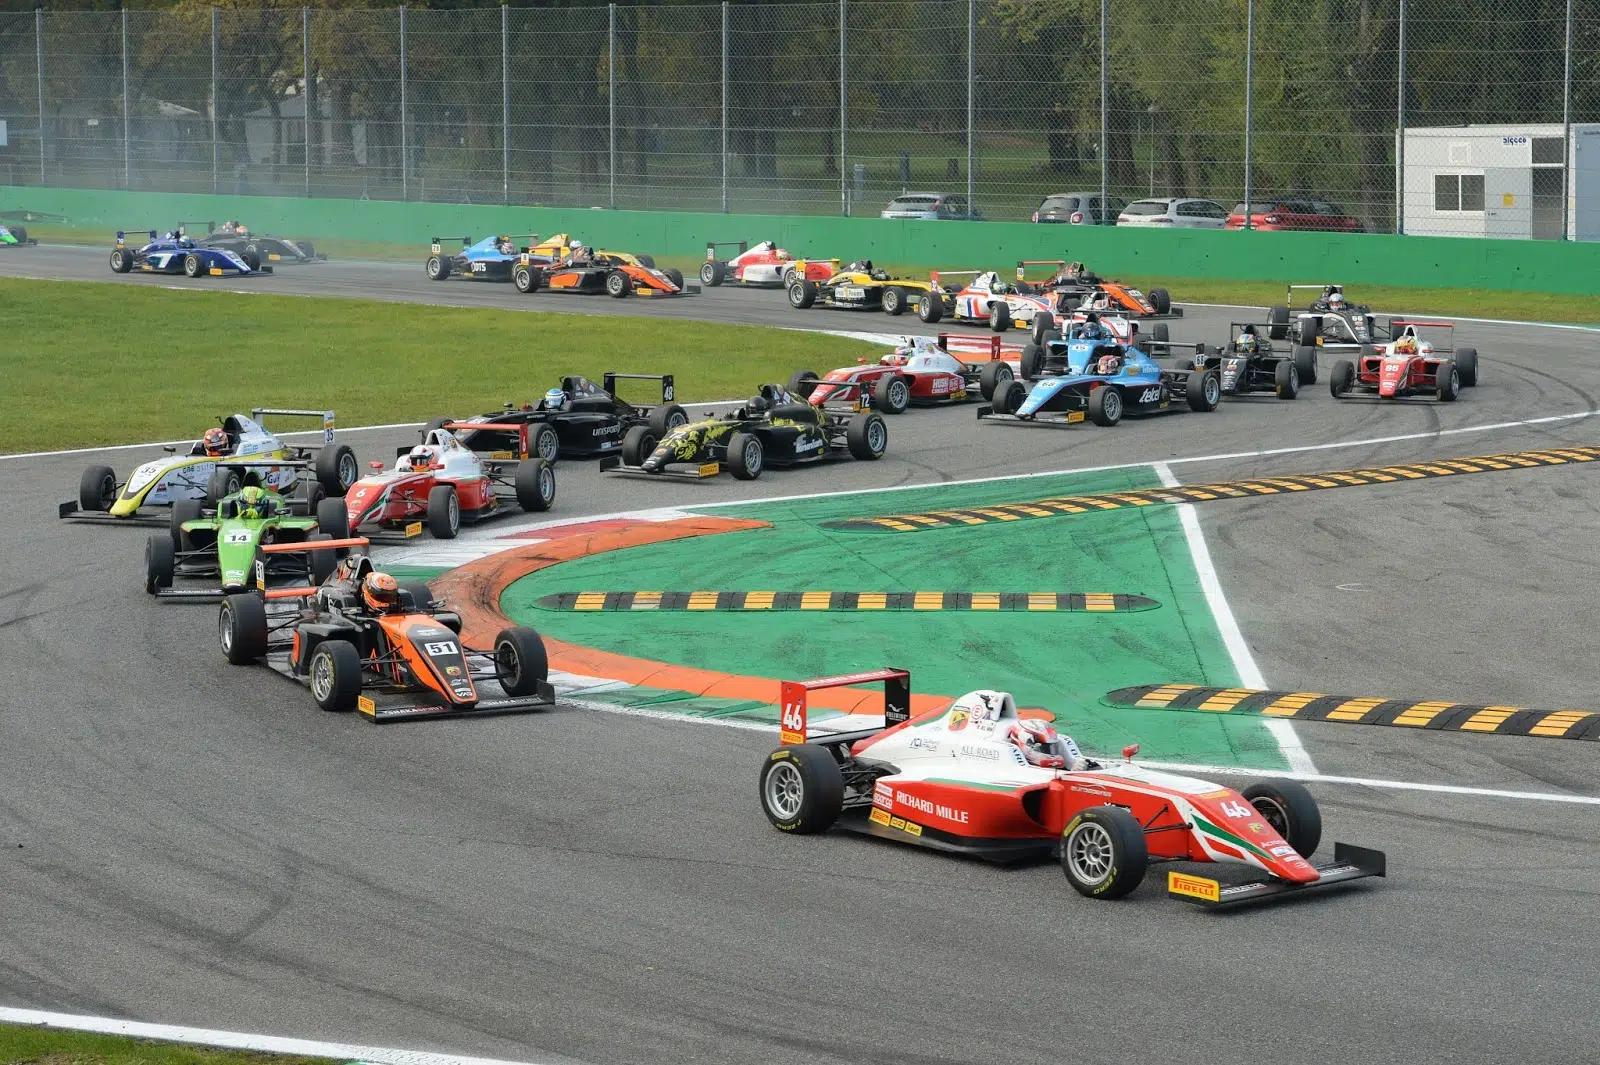 F.42BMonza2B 2BStart2BR2 1 Spectacle and battles in the opening race of the Italian Formula 4 Championship